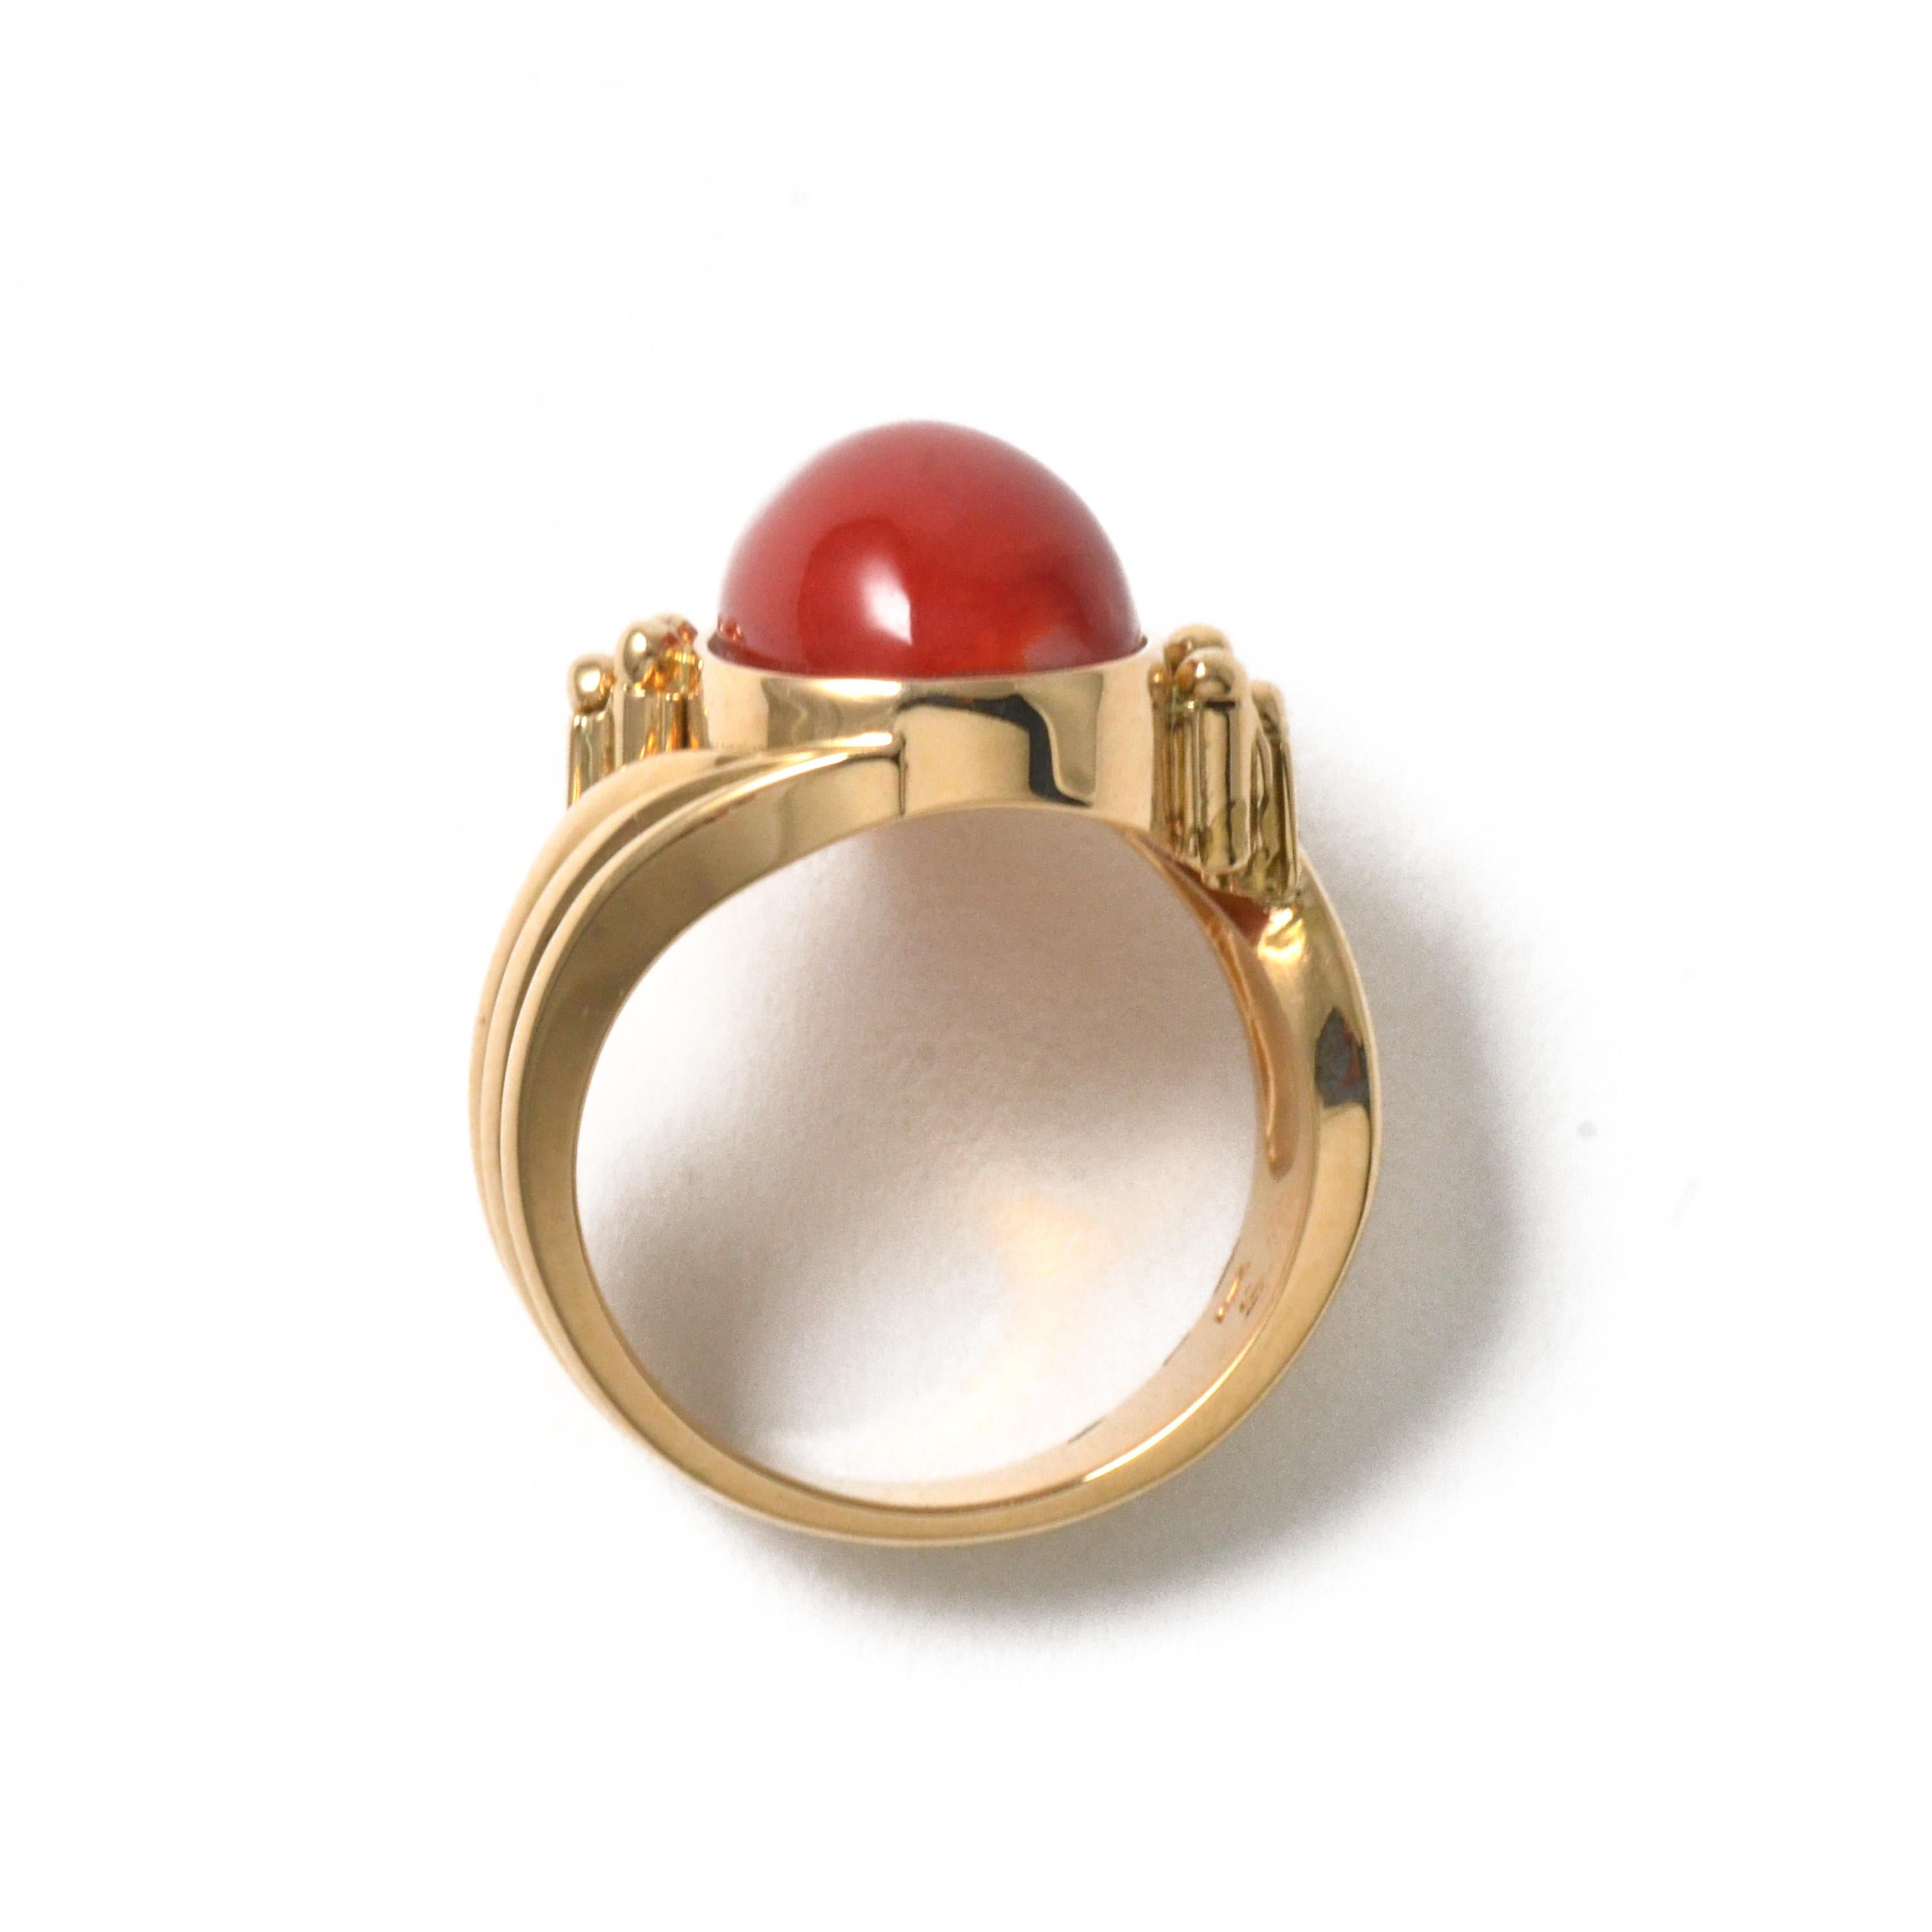 Pear shaped chiaka sango (oxblood coral) is the centerpiece of this very rare, well crafted 18 karat yellow gold ring, which was made about 40 years ago. The very dark red coral has a large, wide shape with substantial thickness and weight. The bold